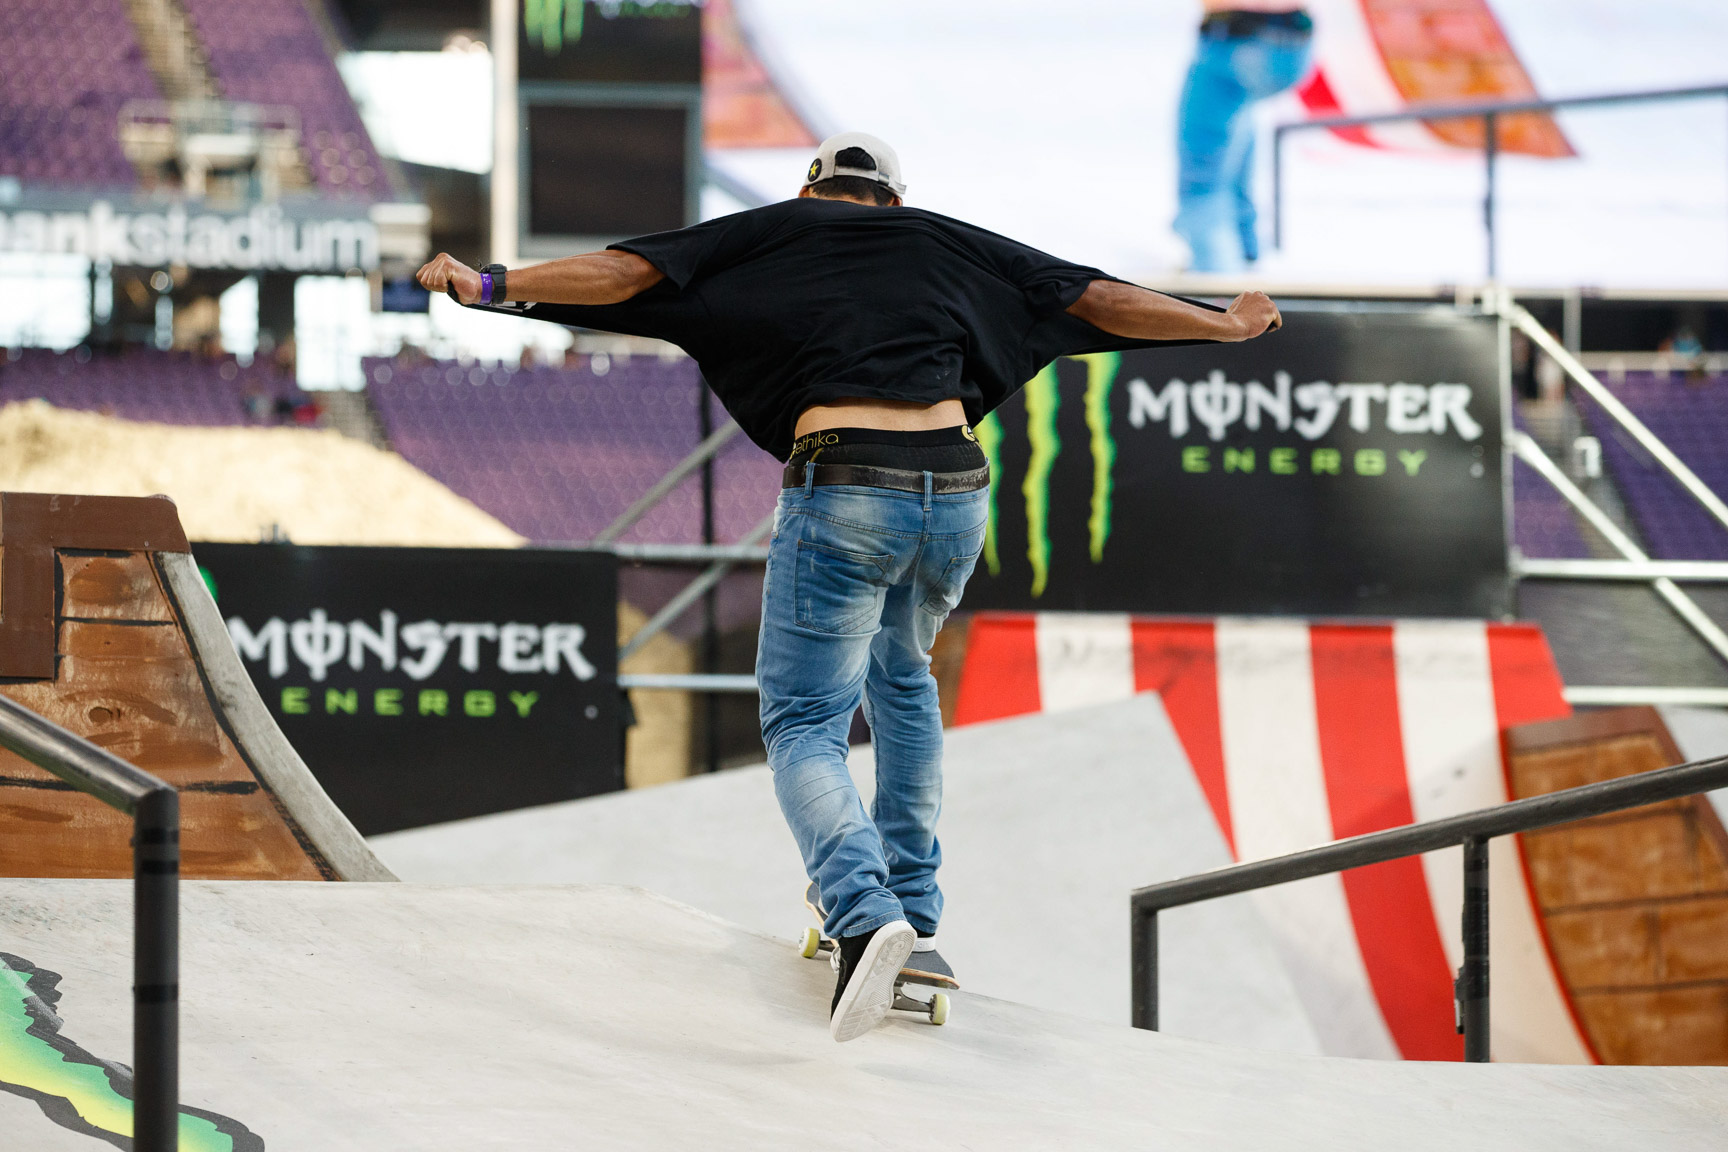 Though he has been a podium regular at most major street contests outside of X Games in recent years, this was the first time that Brazilian skateboarder Kelvin Hoefler has ever earned an X Games invite. He made a point of proving that he has been mistakenly overlooked by solidly winning the gold in Men's Skateboard Street on Saturday and ripping his shirt off, Hulk style, in the process.